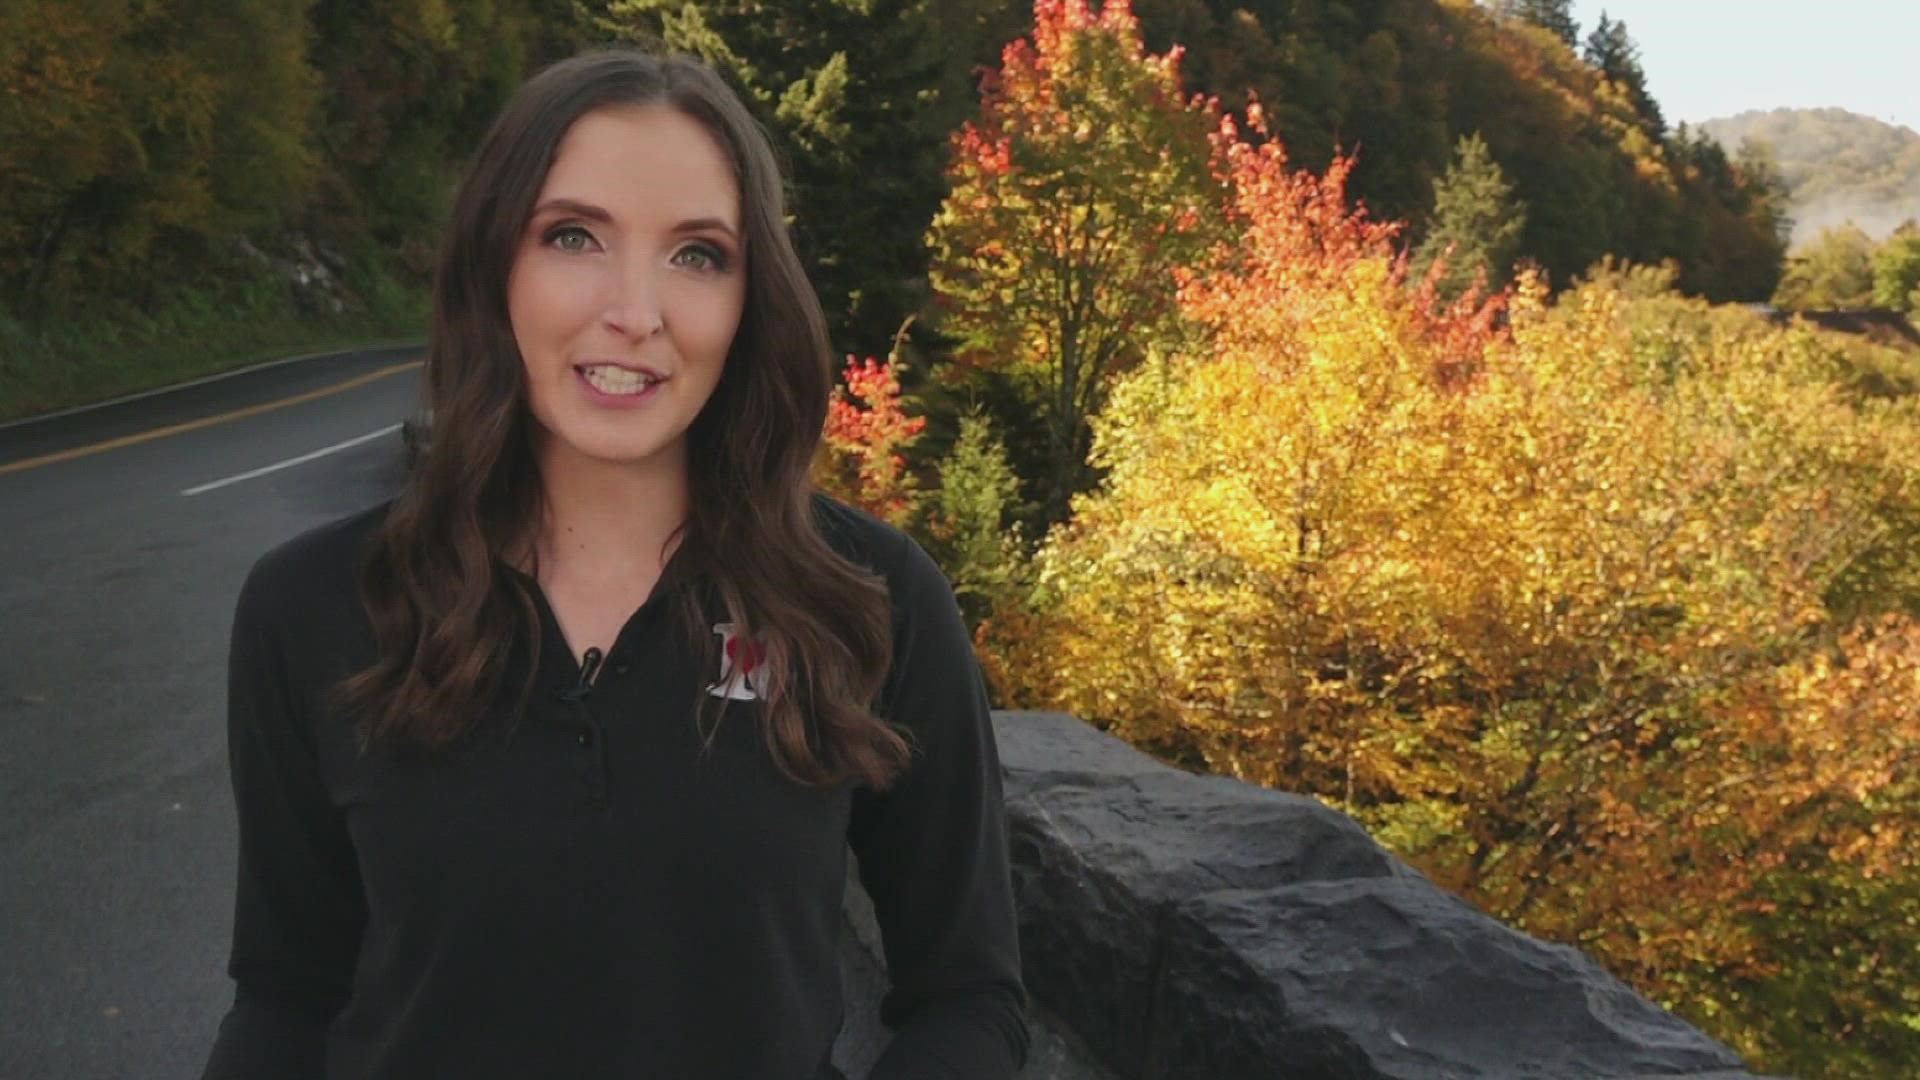 There's still a lot of green in the lower elevations of the foothills, but as you head higher up in the Smokies you'll be greeted with wonderful fall colors.